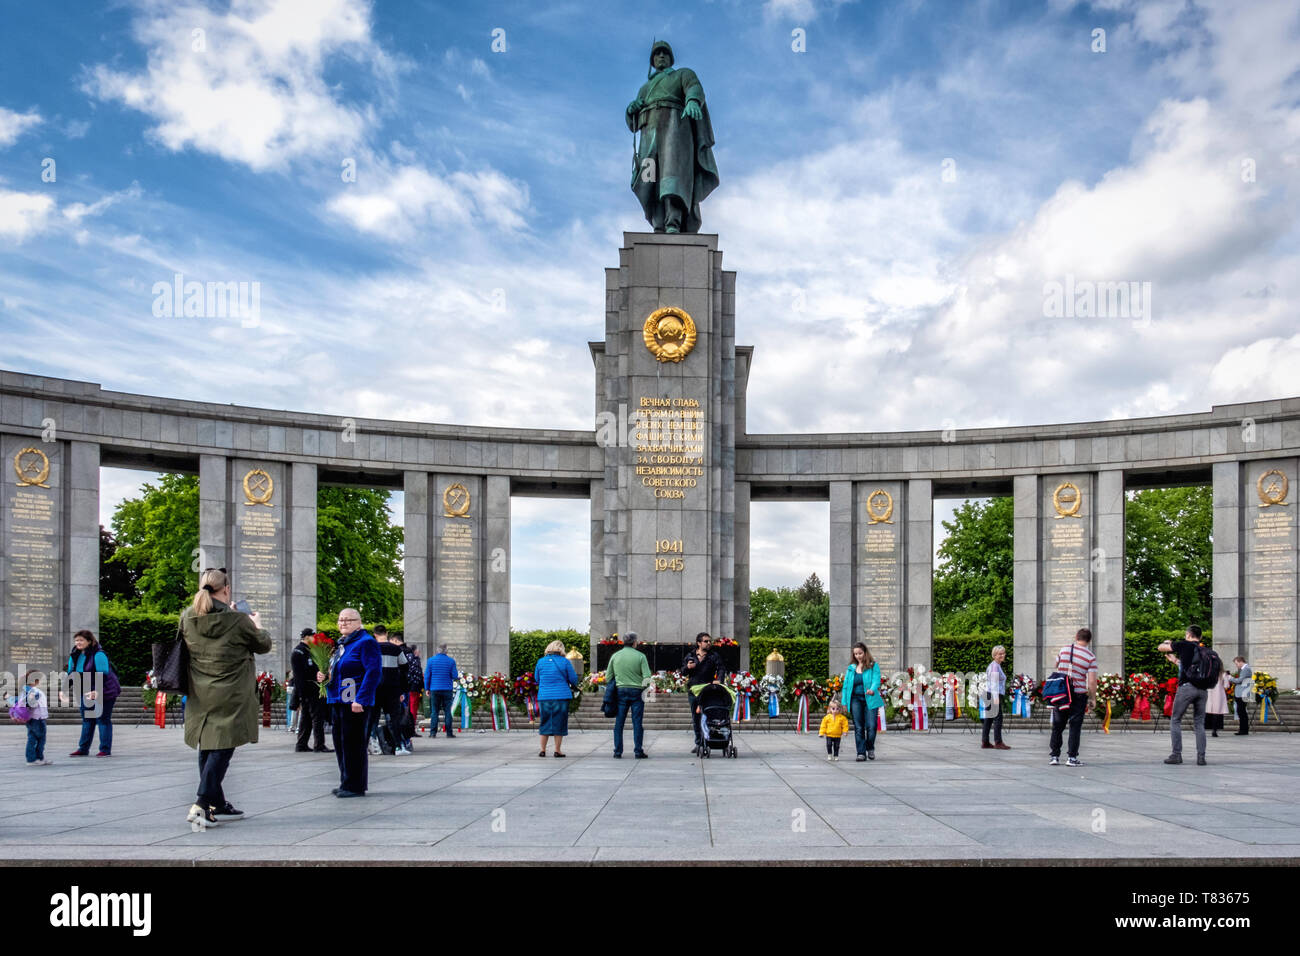 Germany, Berlin, Tiergarten, 8th May 2019, Soviet soldiers are remembered in a wreath-laying ceremony on the anniversary of VE Day on the 8 May. Official bodies lay floral wreaths and people deposit floral tributes and candles around the monument. The Soviet Memorial in Tiergarten commemorates the 80,000 Soviet soldiers who fell during the Battle of Berlin in the last weeks of the Second World War in Germany. The war memorial on Straße des 17. Juni was designed by architect Mikhail Gorvits with the sculpture of the Soviet soldier by sculptors Vladimir Tsigal and Lev Kerbel. Stock Photo